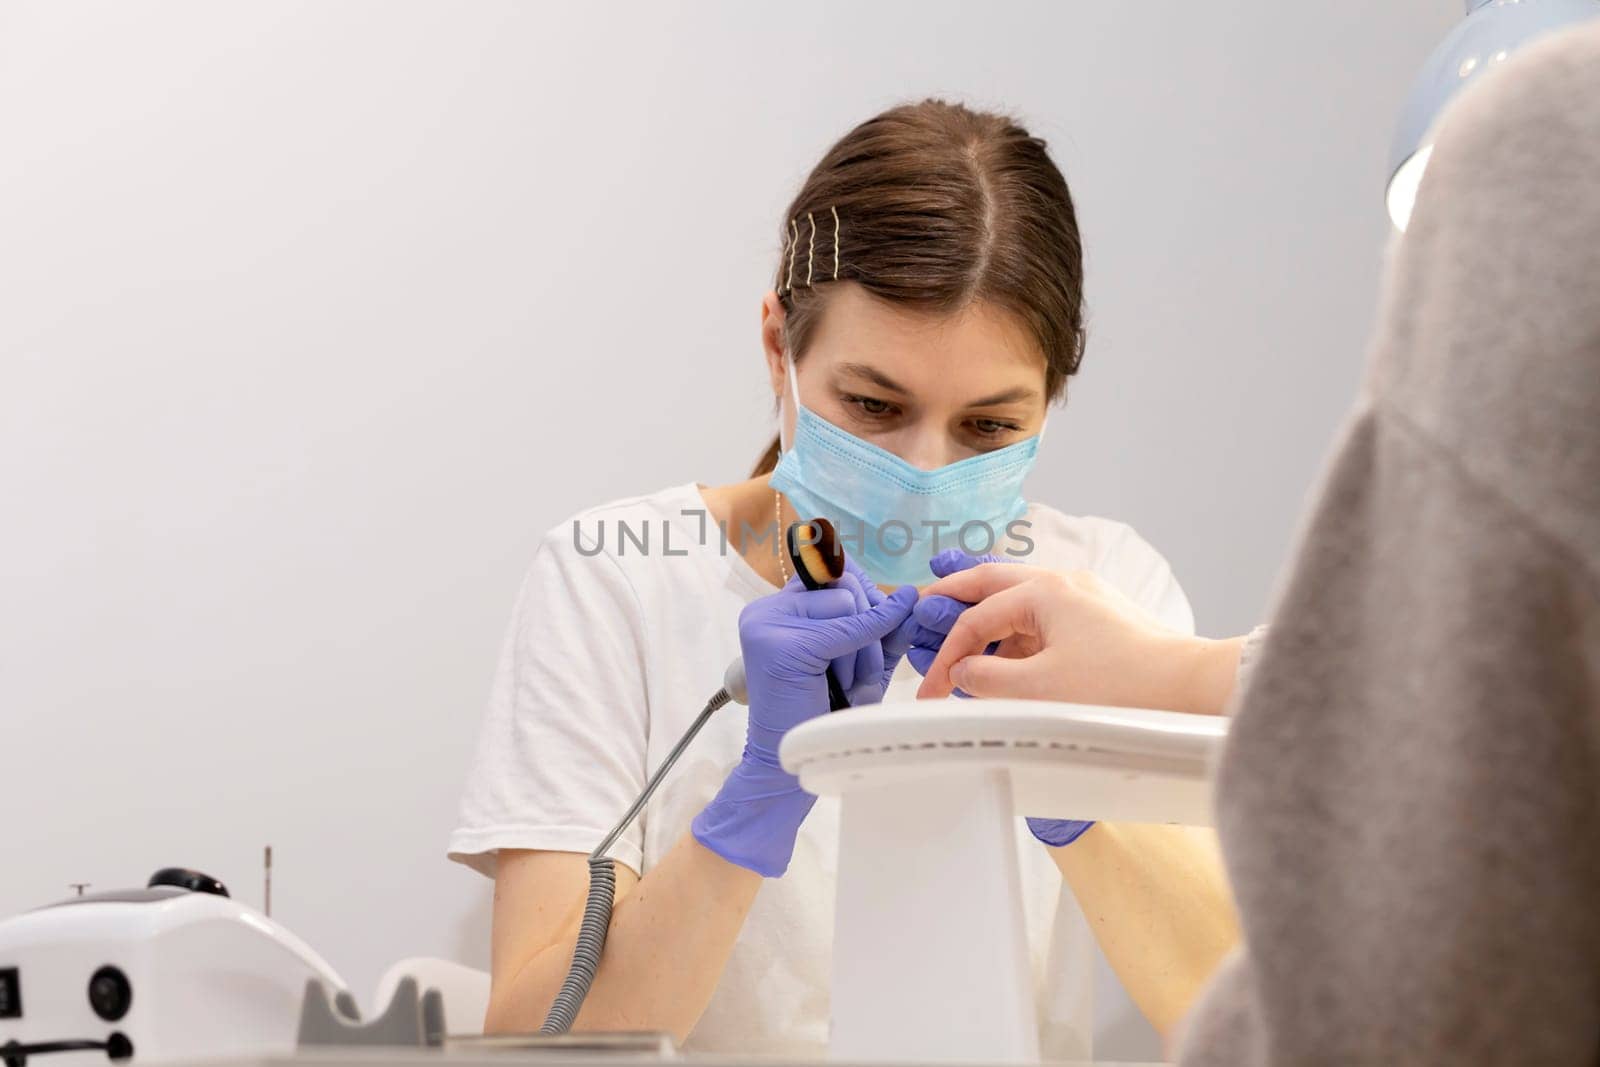 White nail technician in mask drills, removes client's cuticle with hardware machine, holding nail brush. Customer wears warm cloth, sweater. Cold season. Combined manicure, beauty treatment in spa.